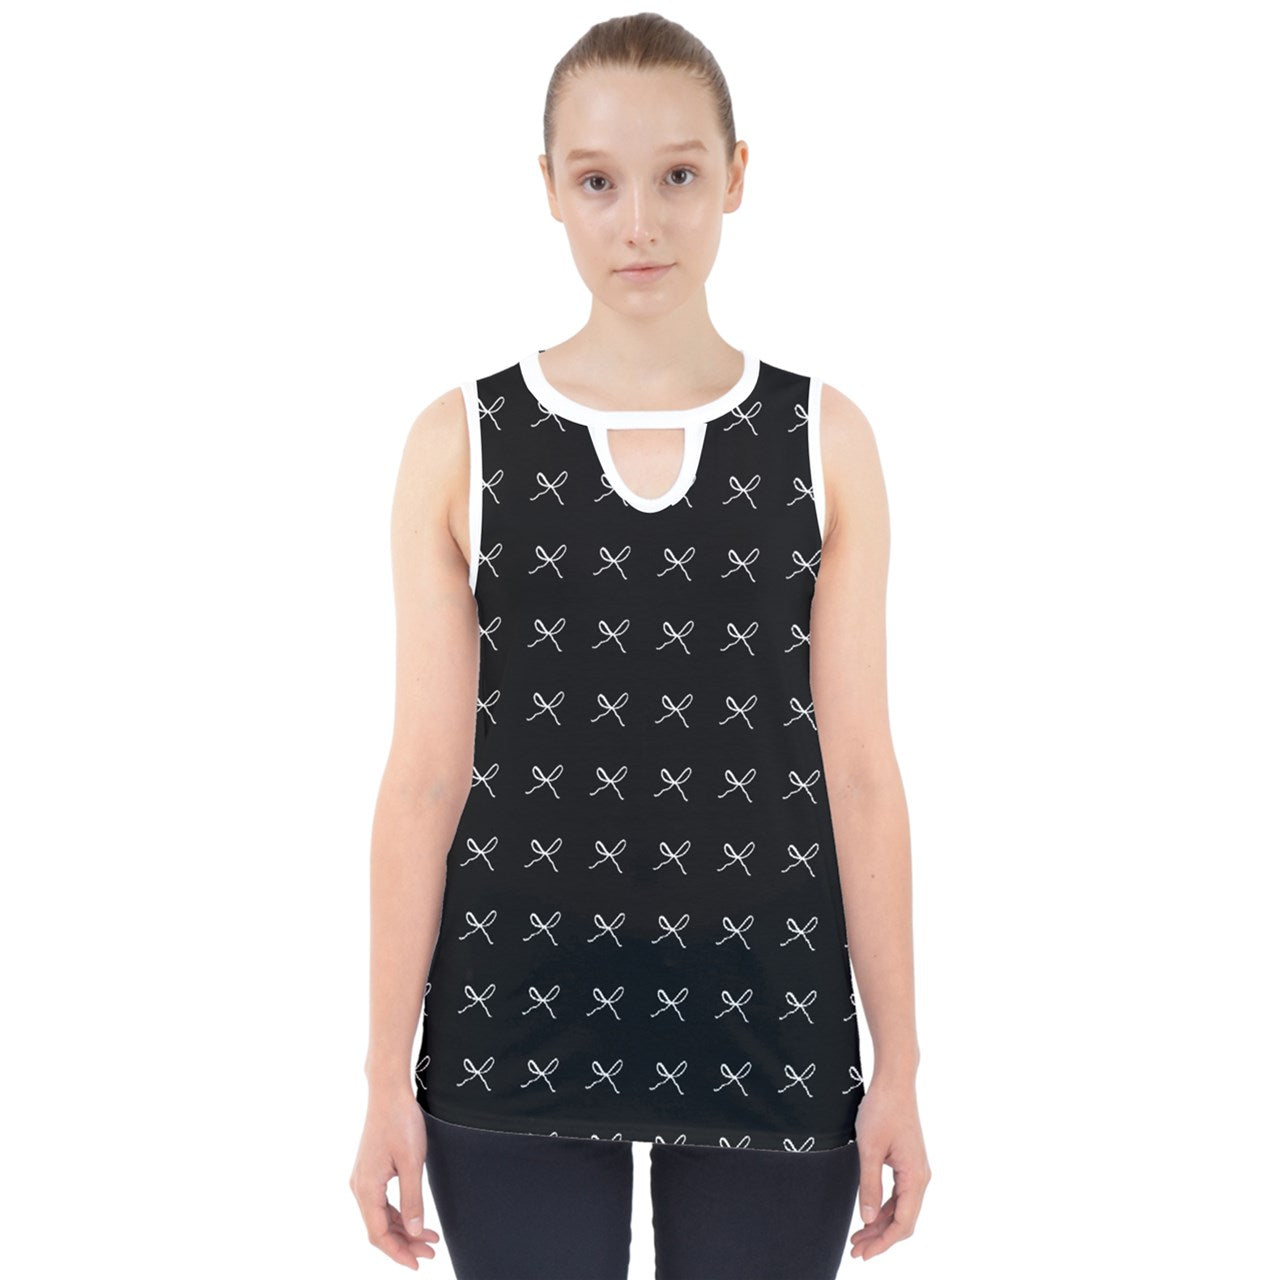 Rows of Bows dark Cut Out Tank Top